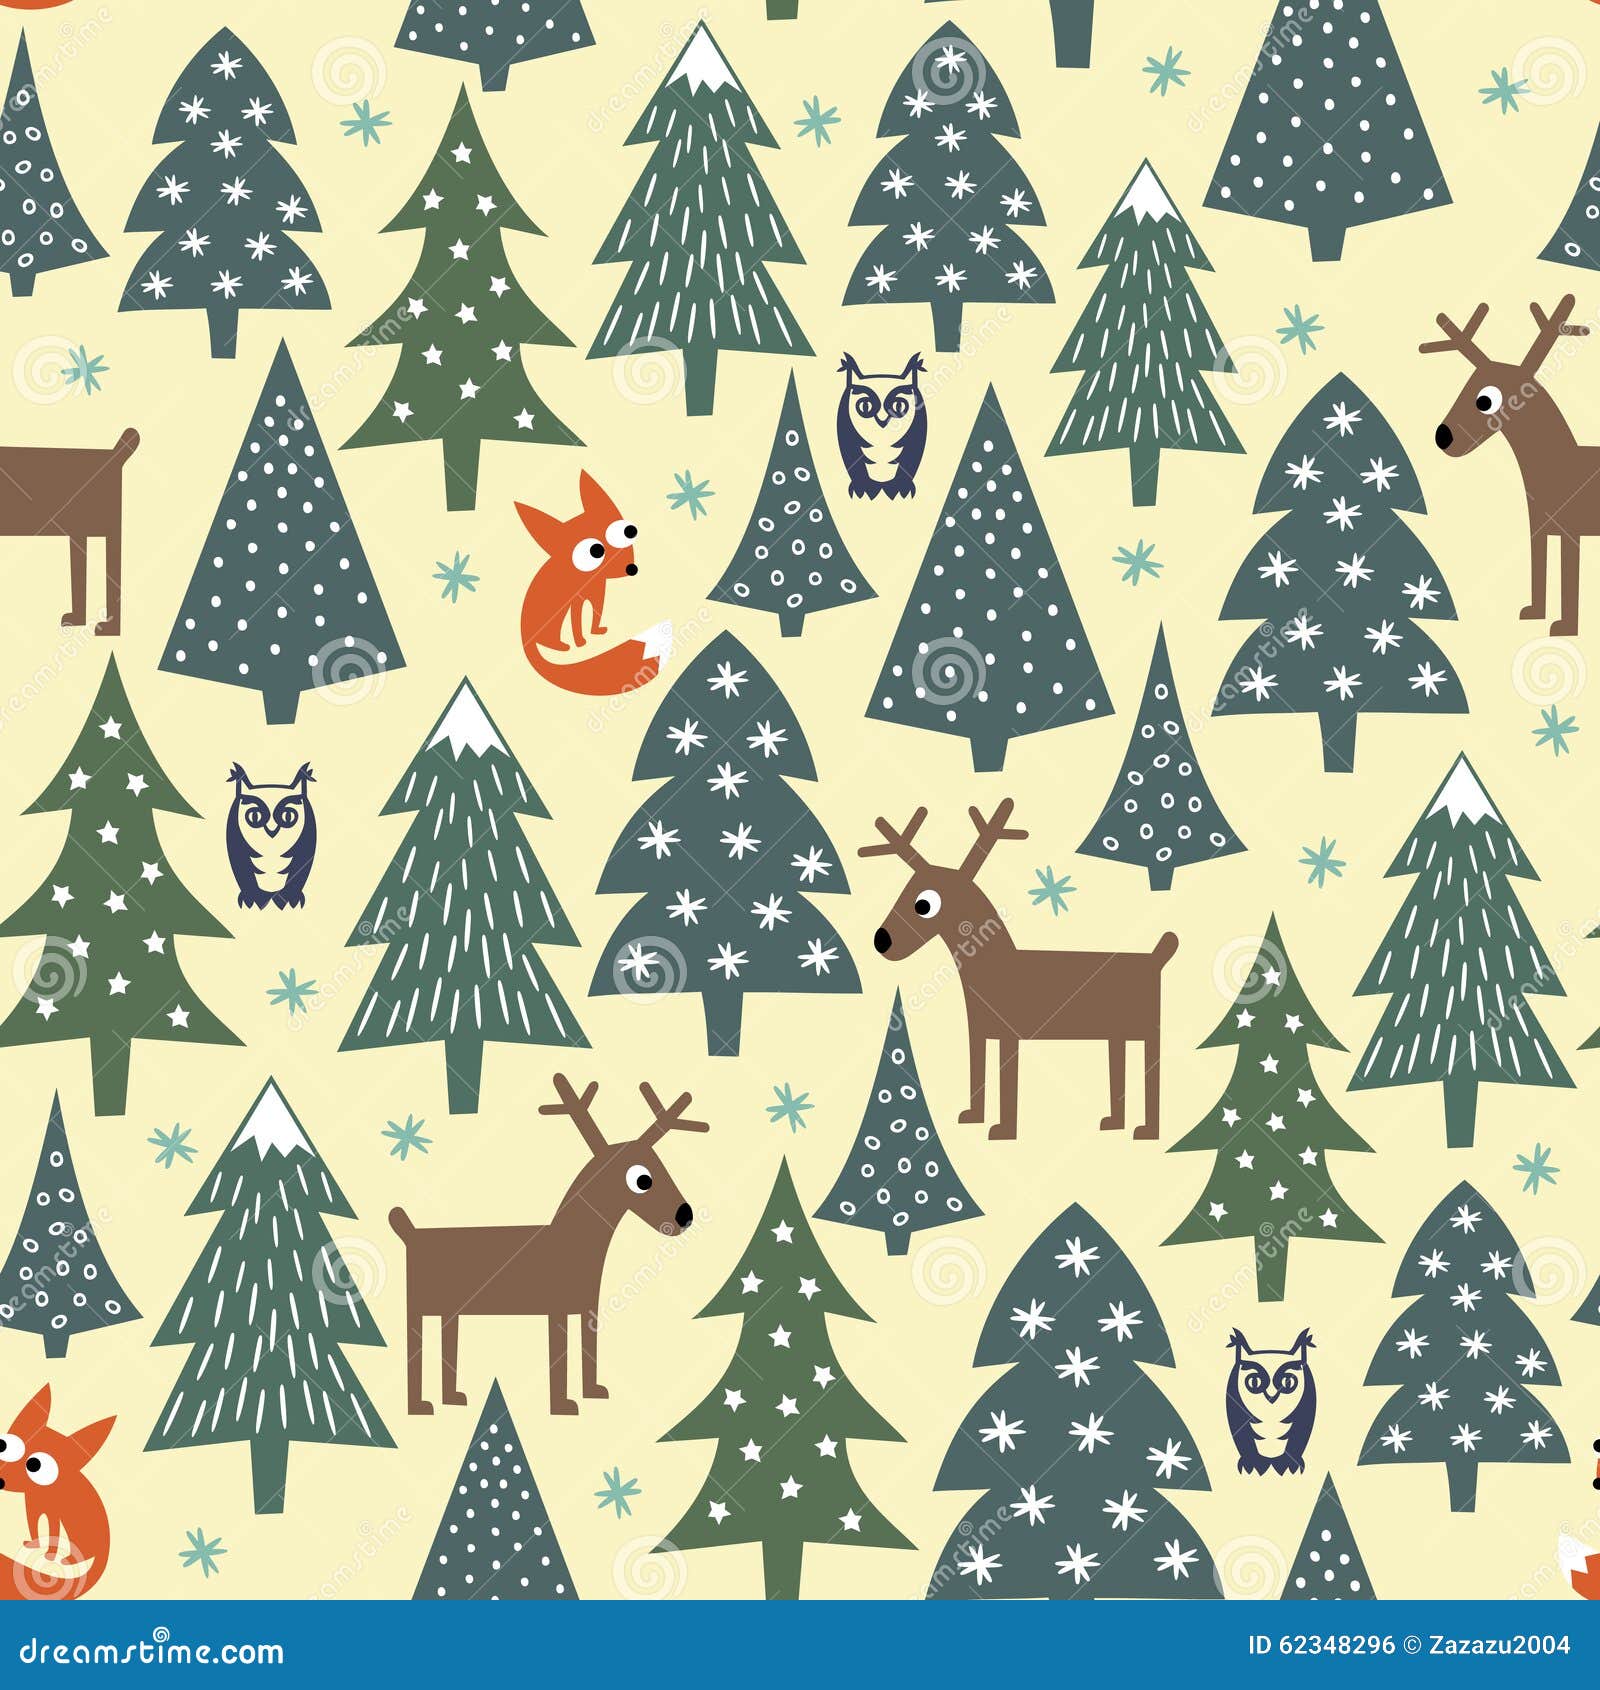 seamless christmas pattern - varied xmas trees, houses,foxes, owls and deers.